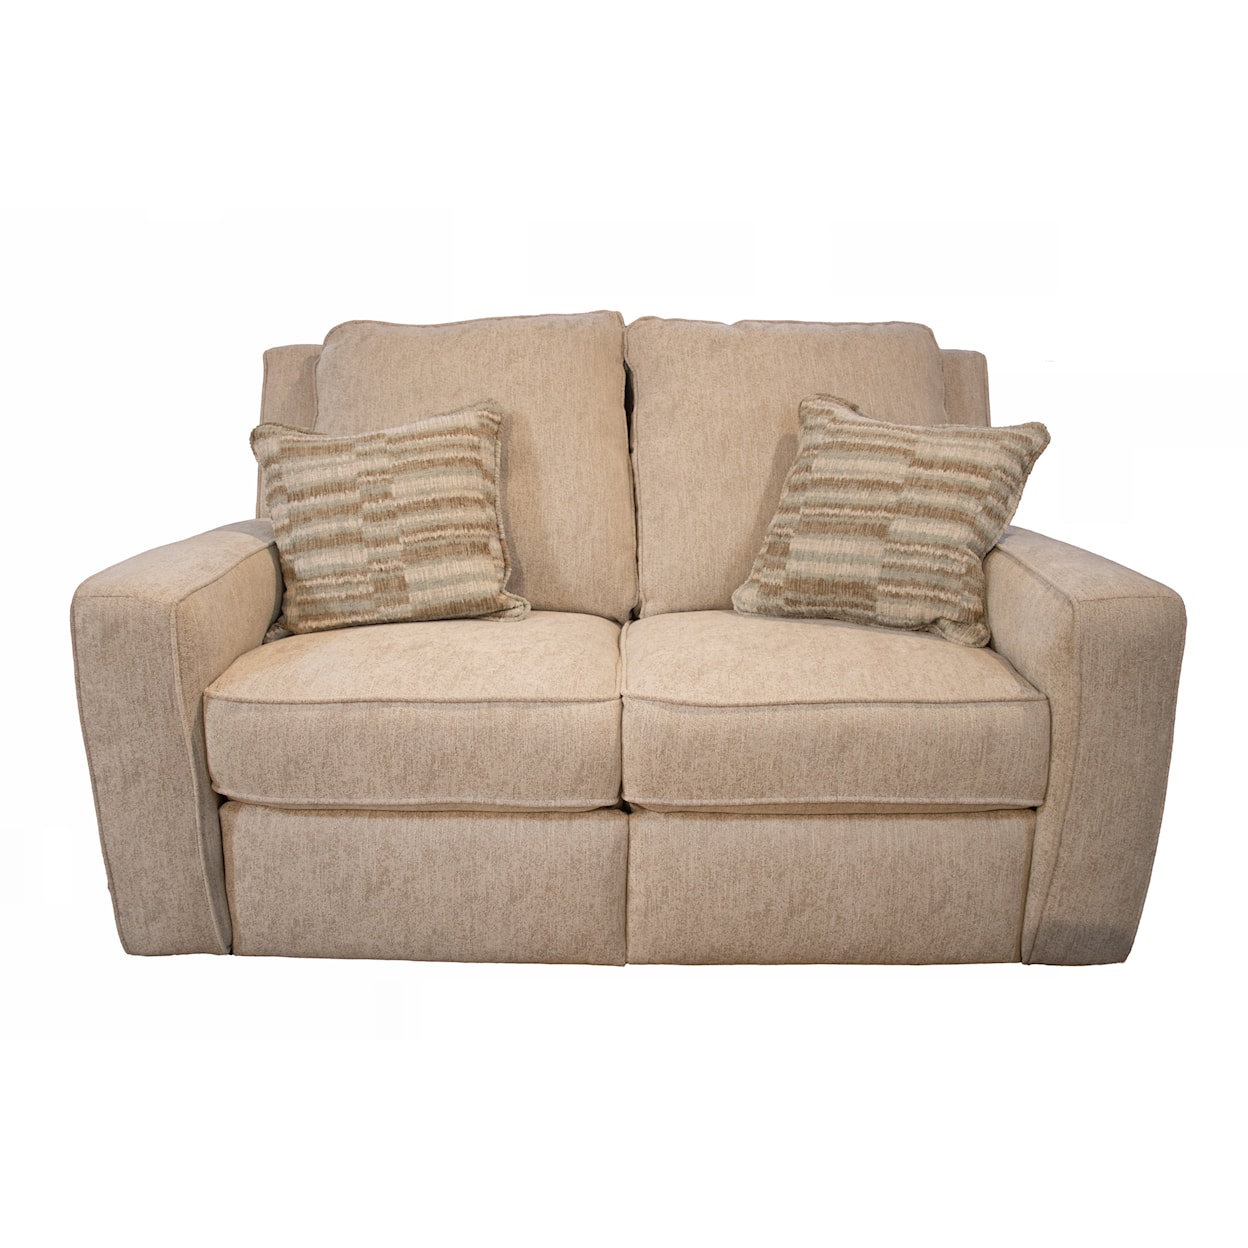 Southern Motion City Limits Power Reclining Loveseat with Power Headrest